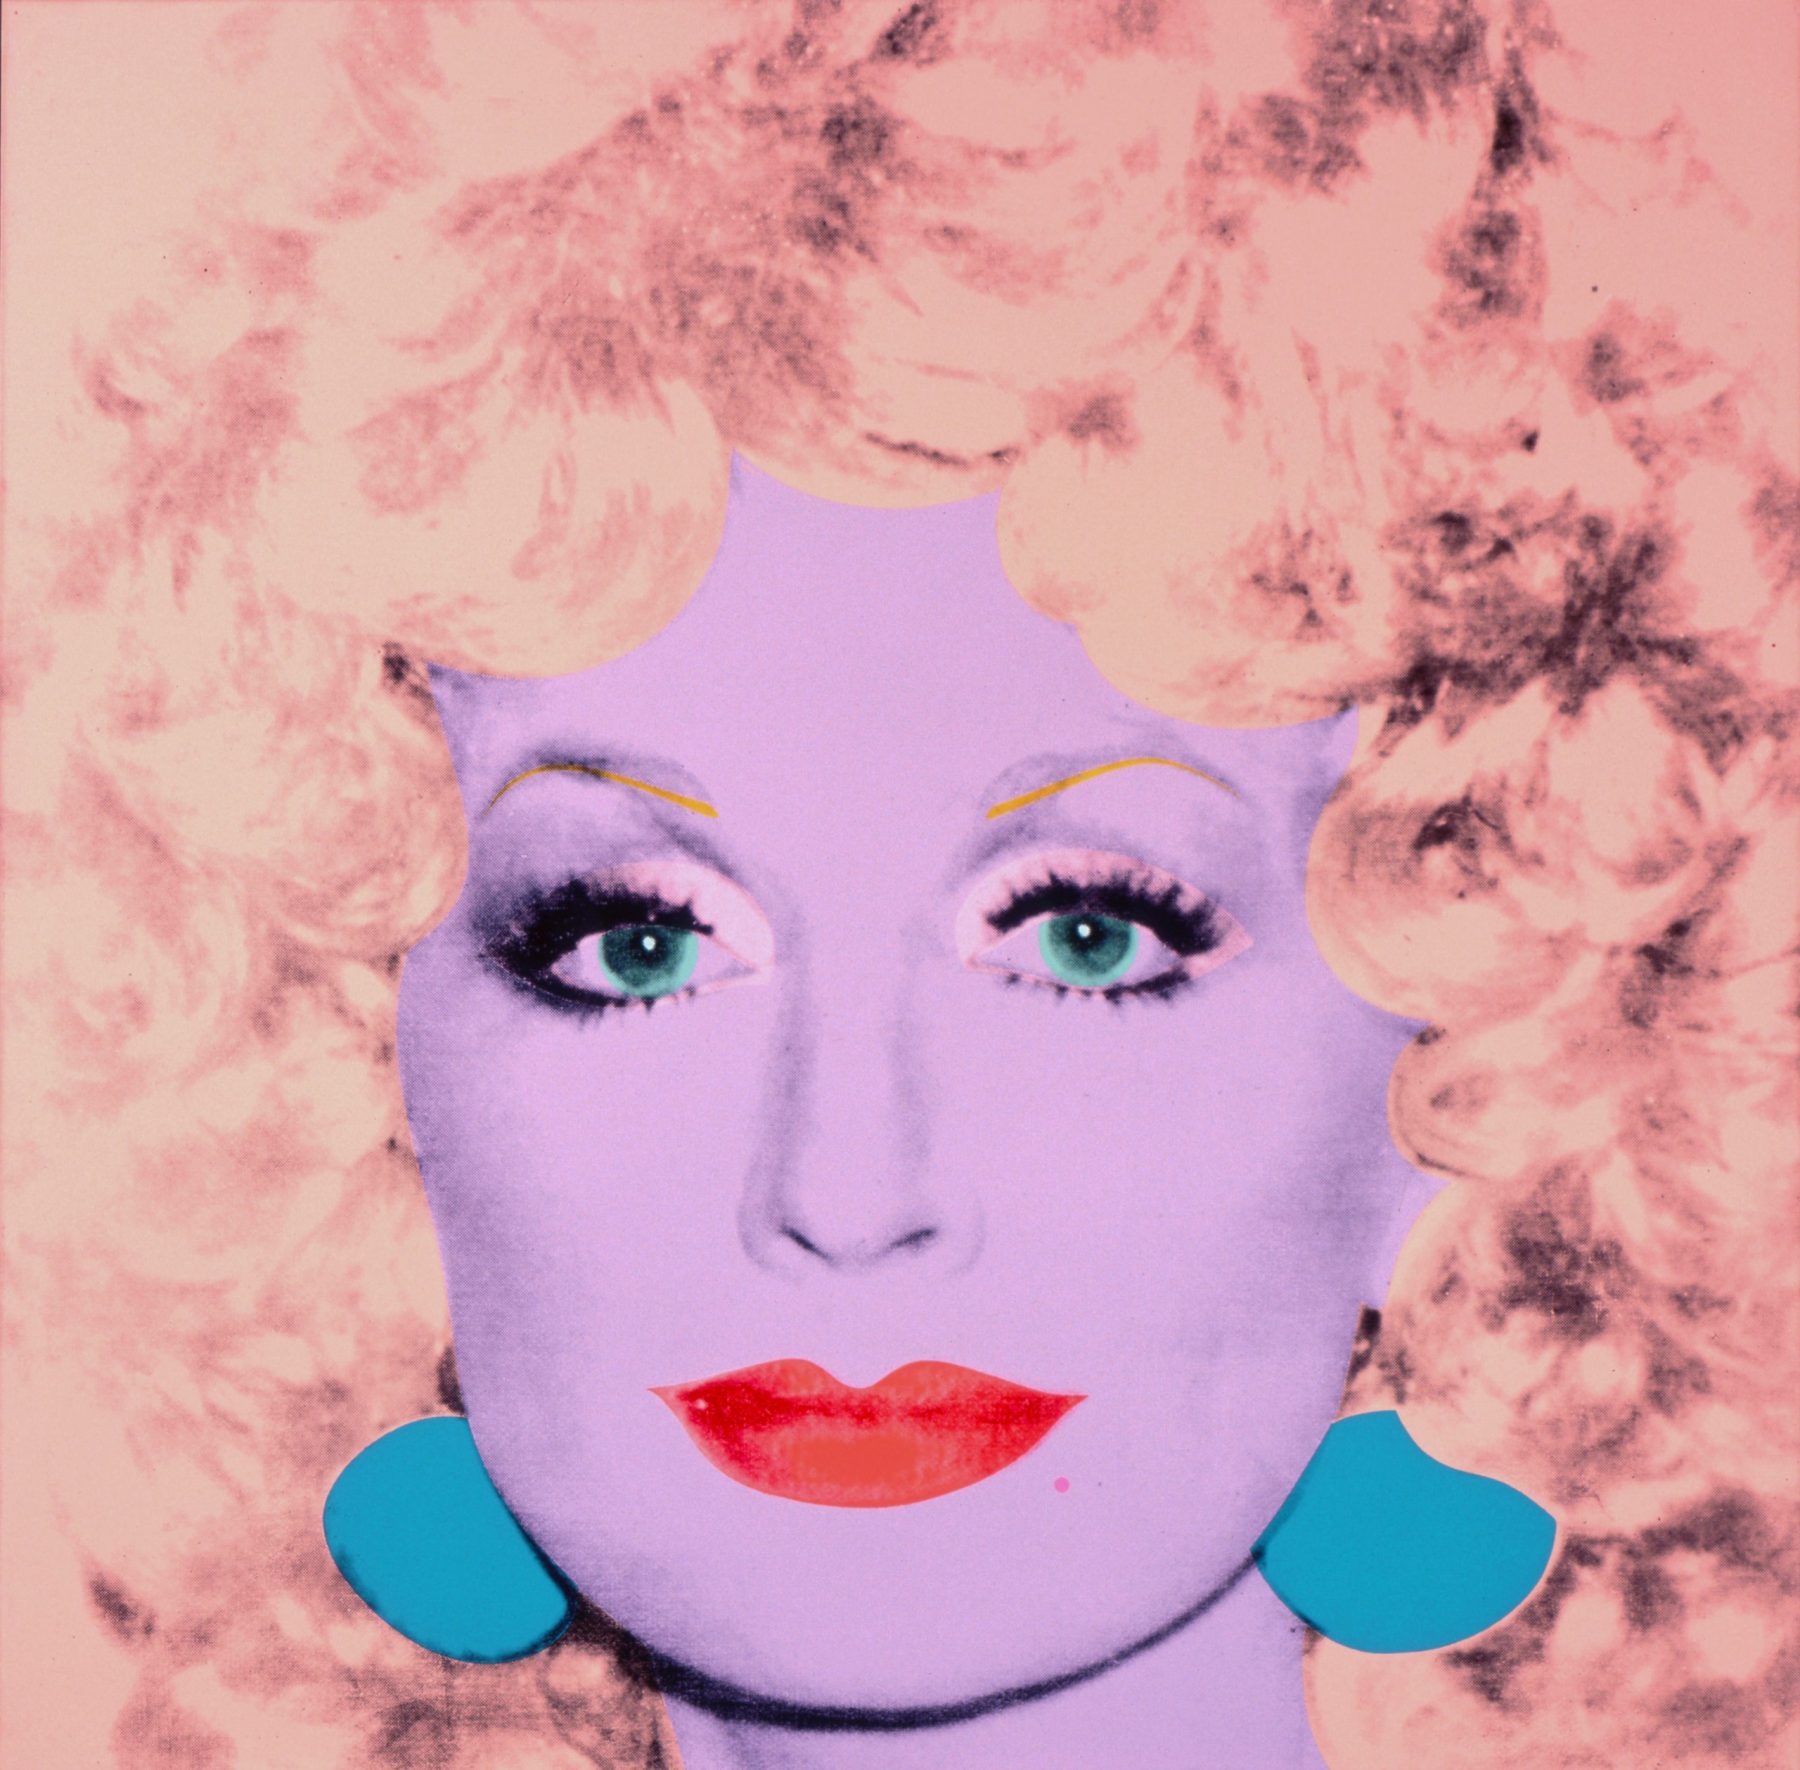 Andy Warhol Dolly Parton, 1985 The Andy Warhol Museum, Pittsburgh; Founding Collection, Contribution The Andy Warhol Foundation for the Visual Arts, Inc. 1998.1.625 ©2023 The Andy Warhol Foundation for the Visual Arts, Inc. / Licensed by DACS, London